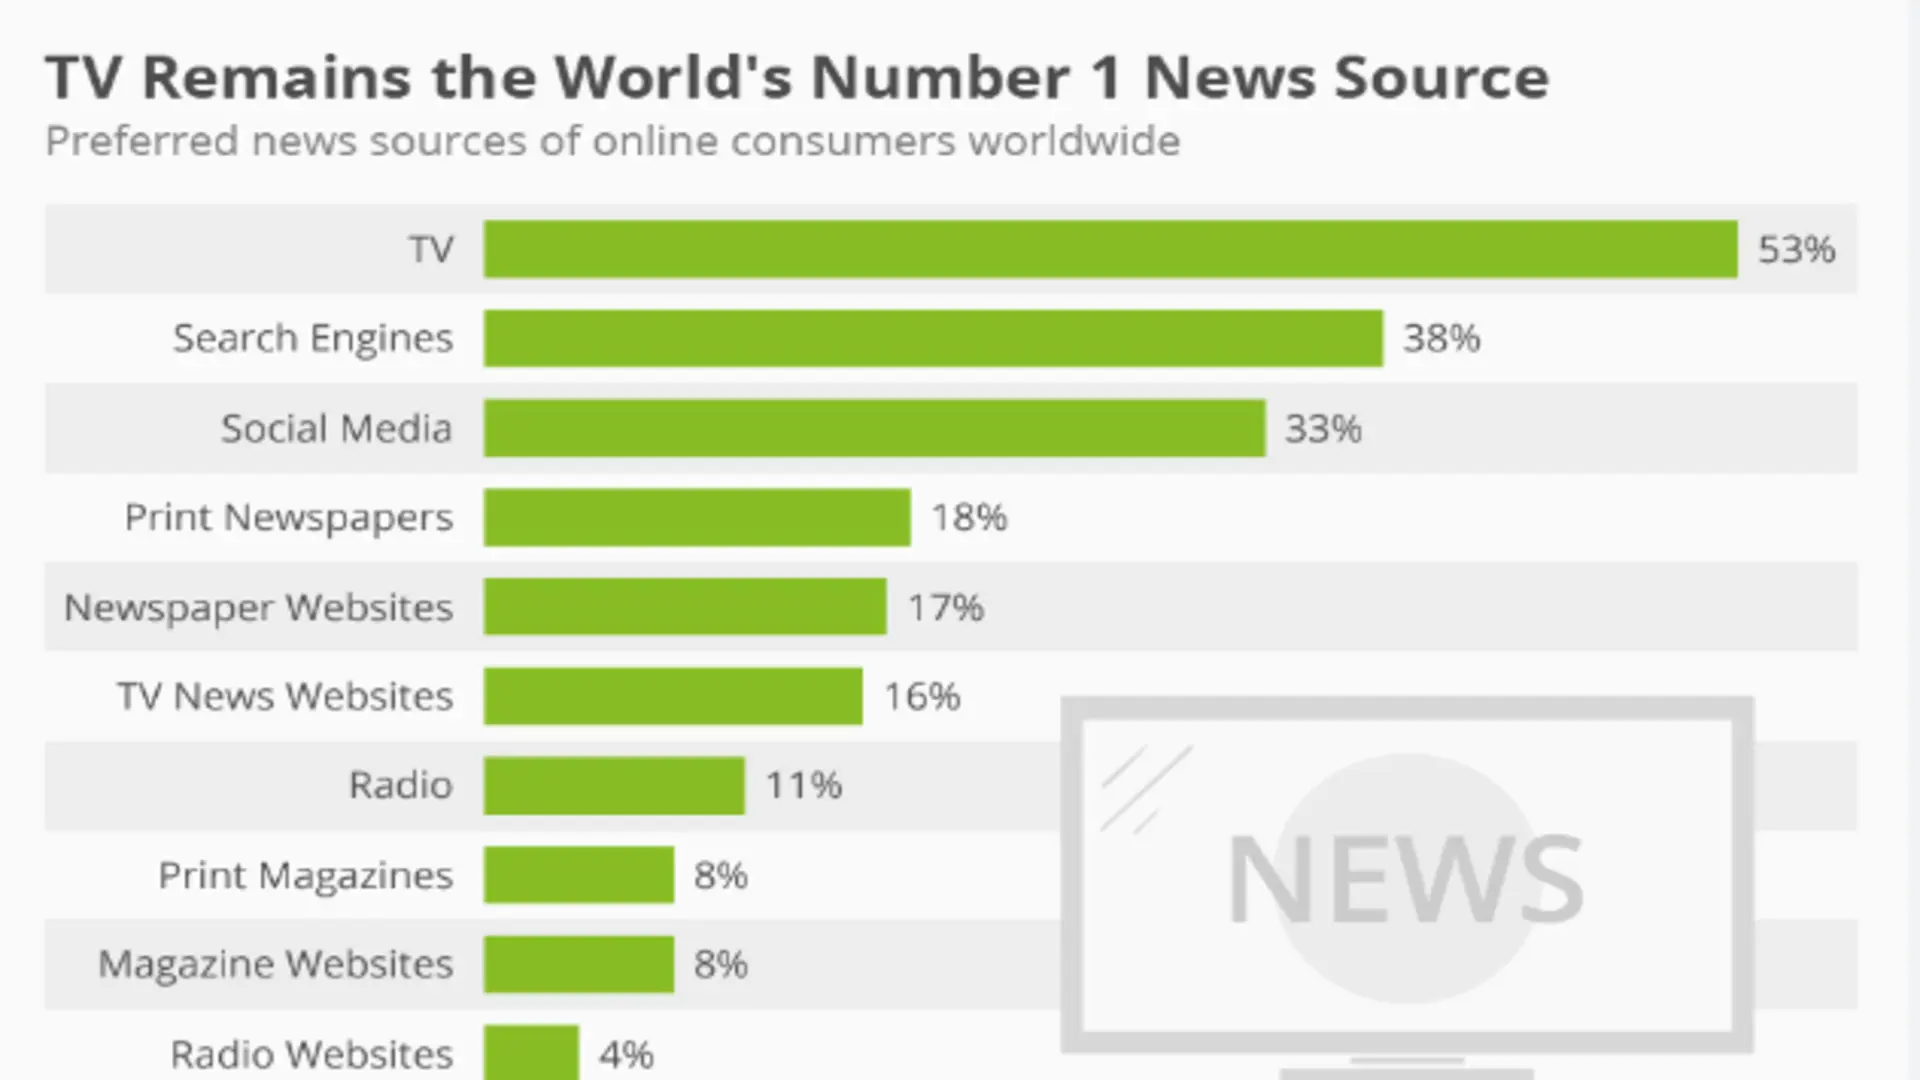 Top 5 Most Popular News Sources